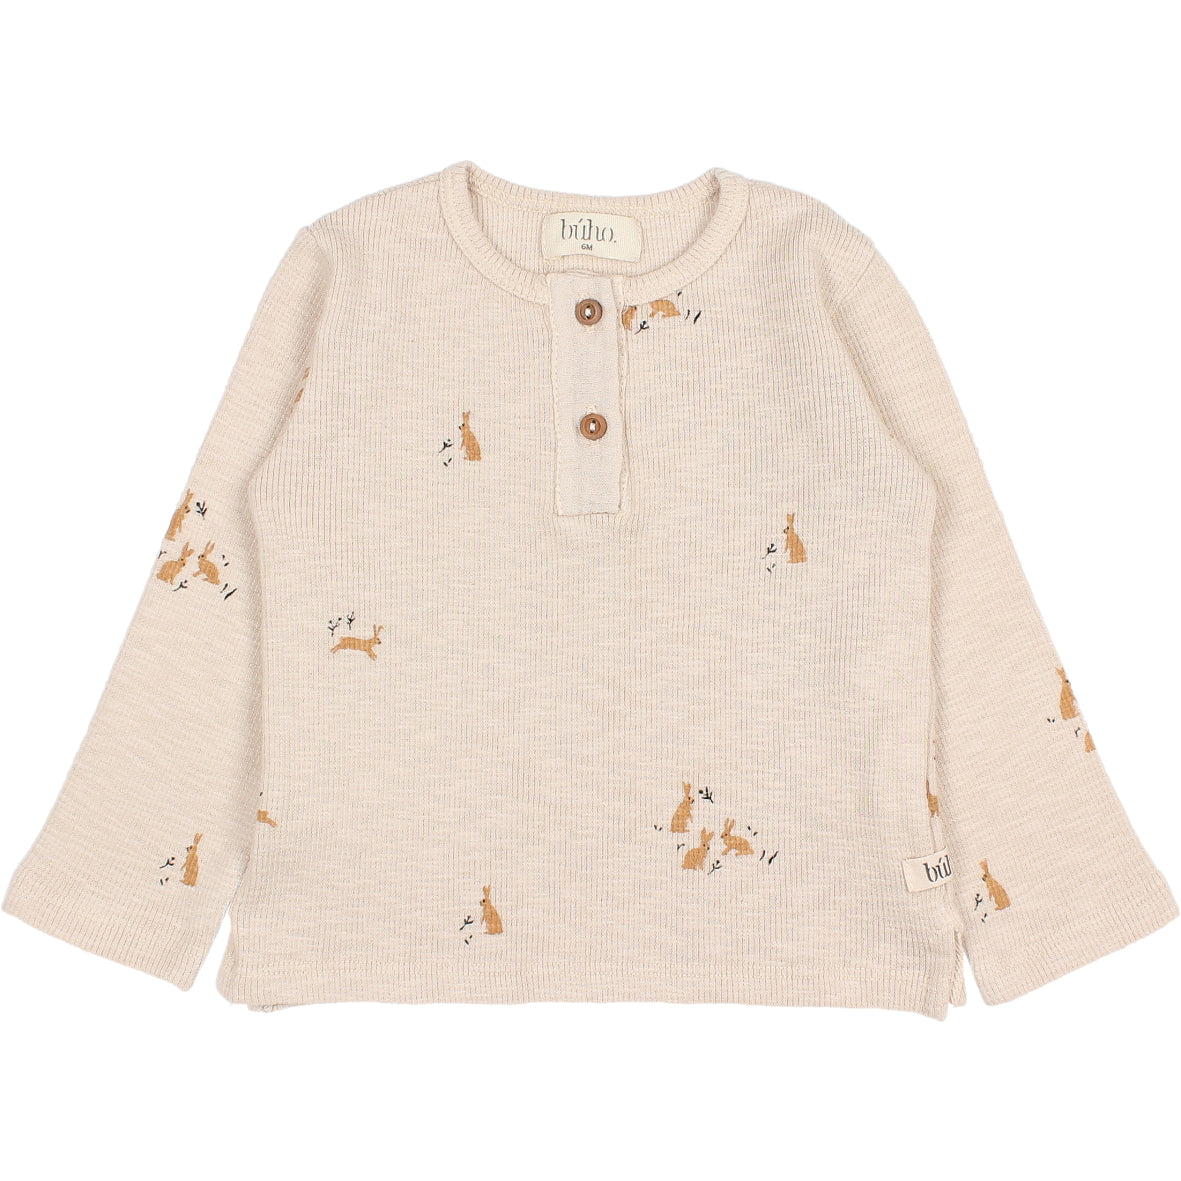 Buho Baby Bunny Outfit Set